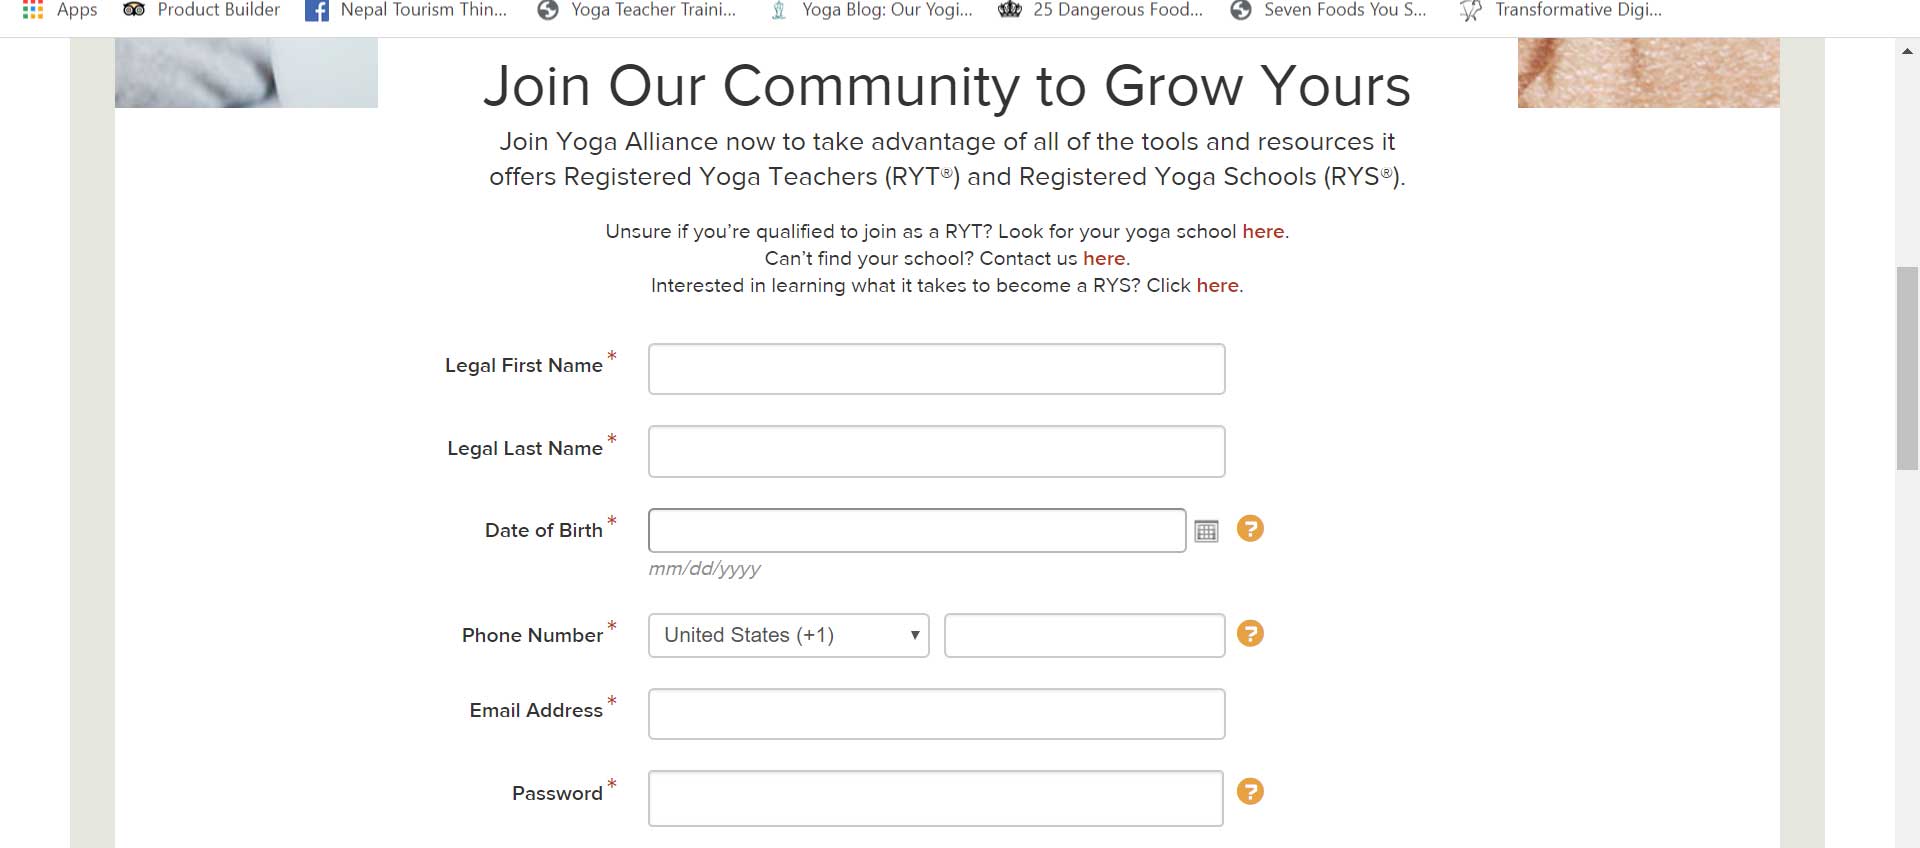 How to Register with Yoga Alliance After Graduation